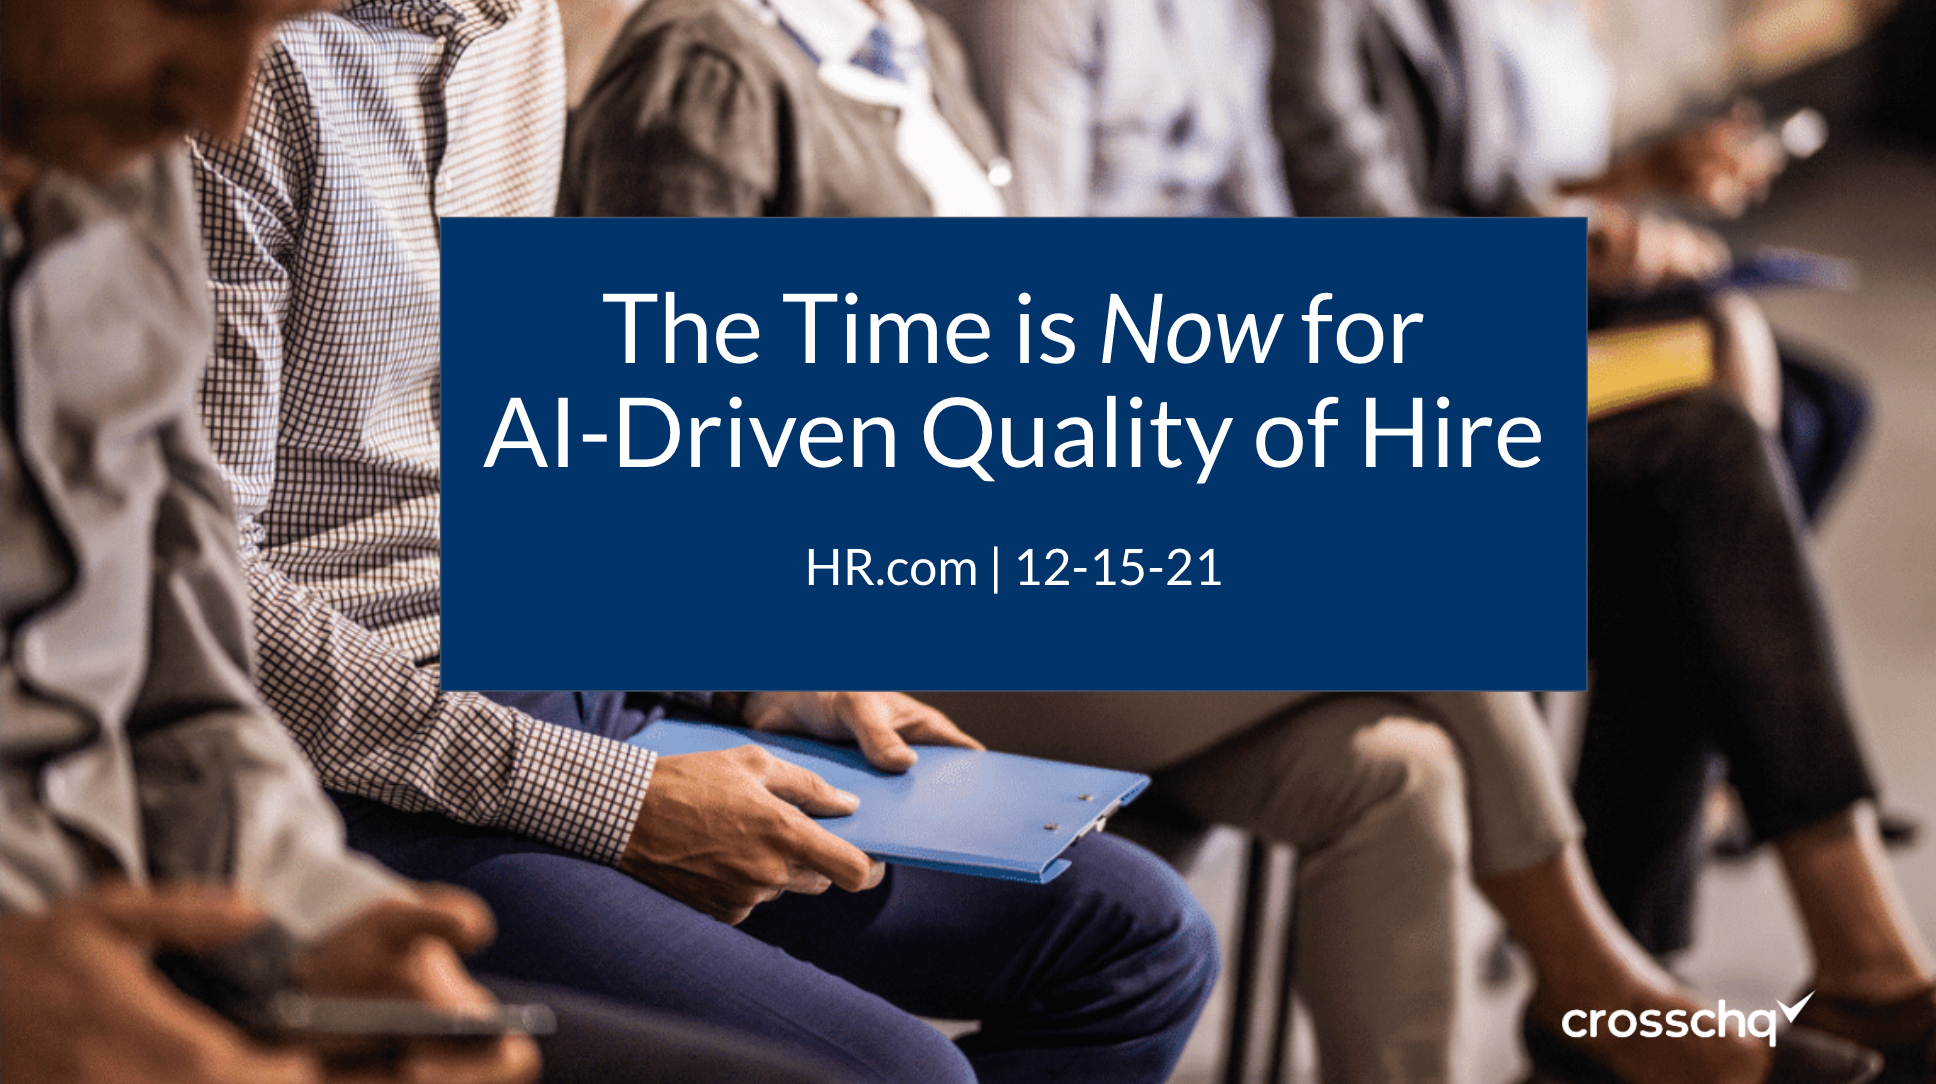 The Time is Now for AI-Driven Quality of Hire